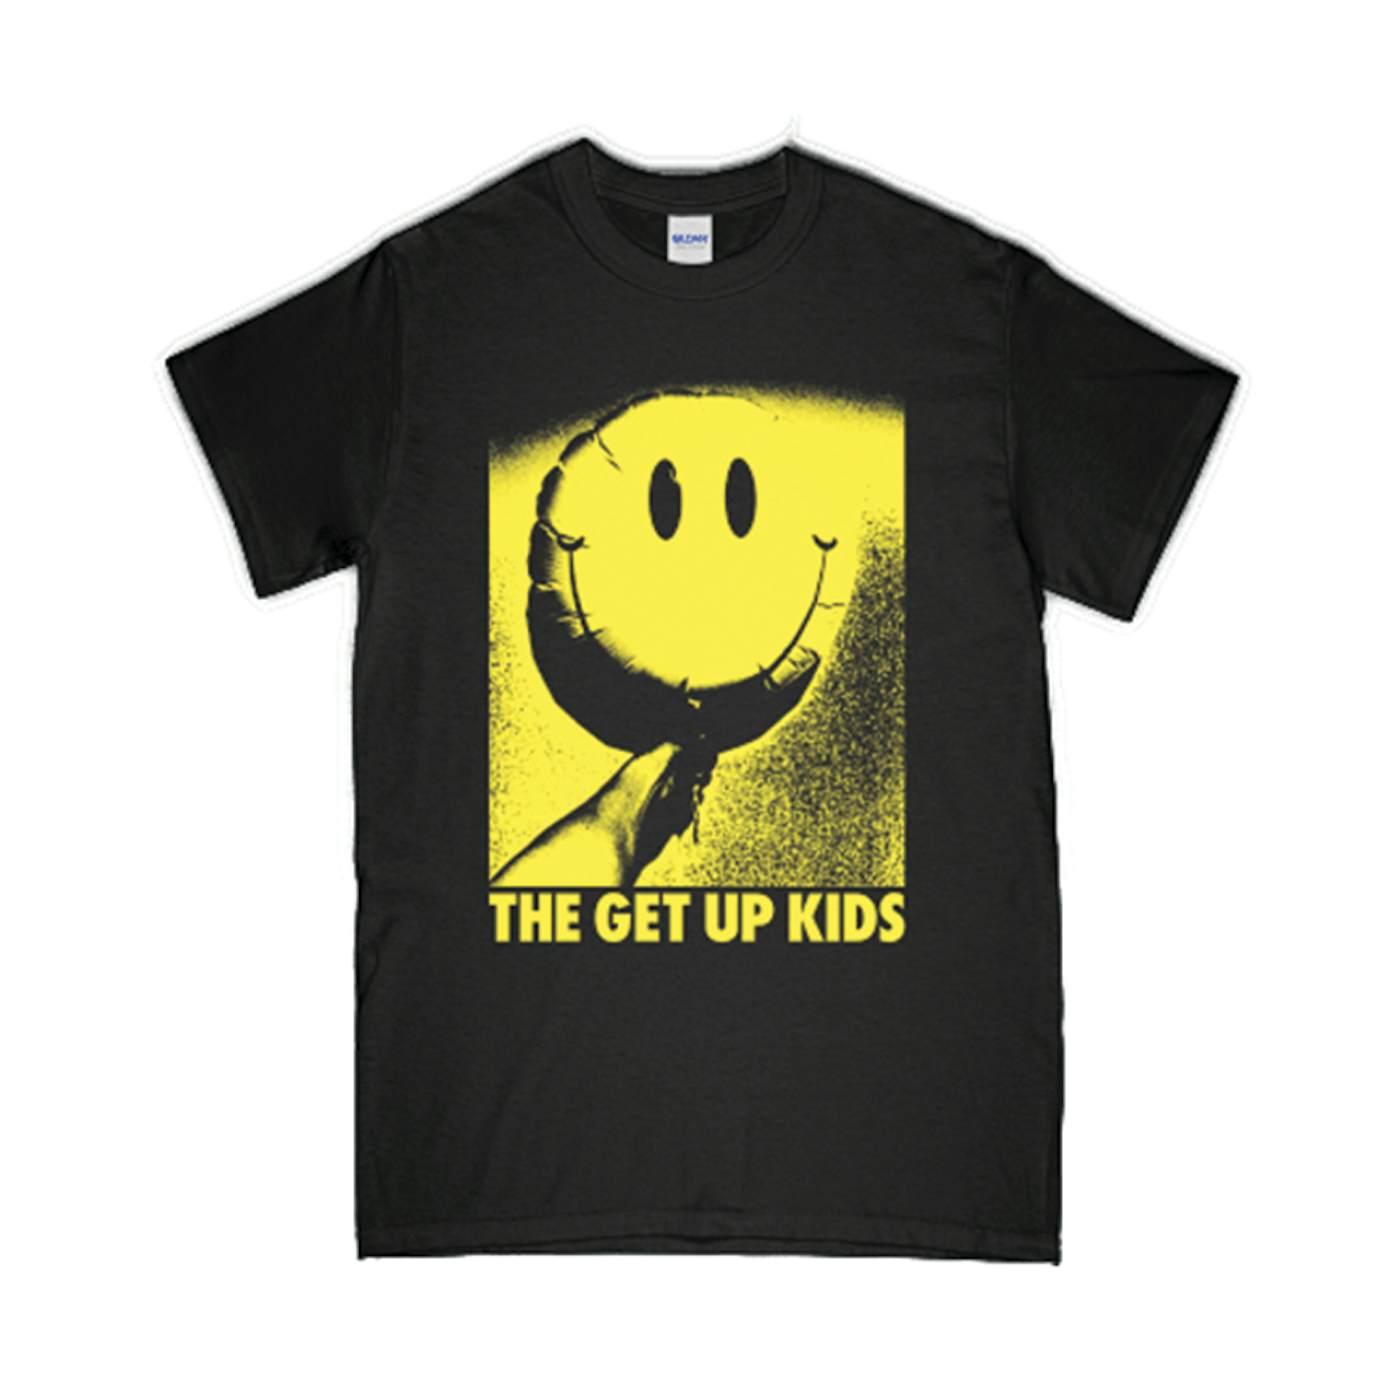 The Get Up Kids "Smile" T-Shirt